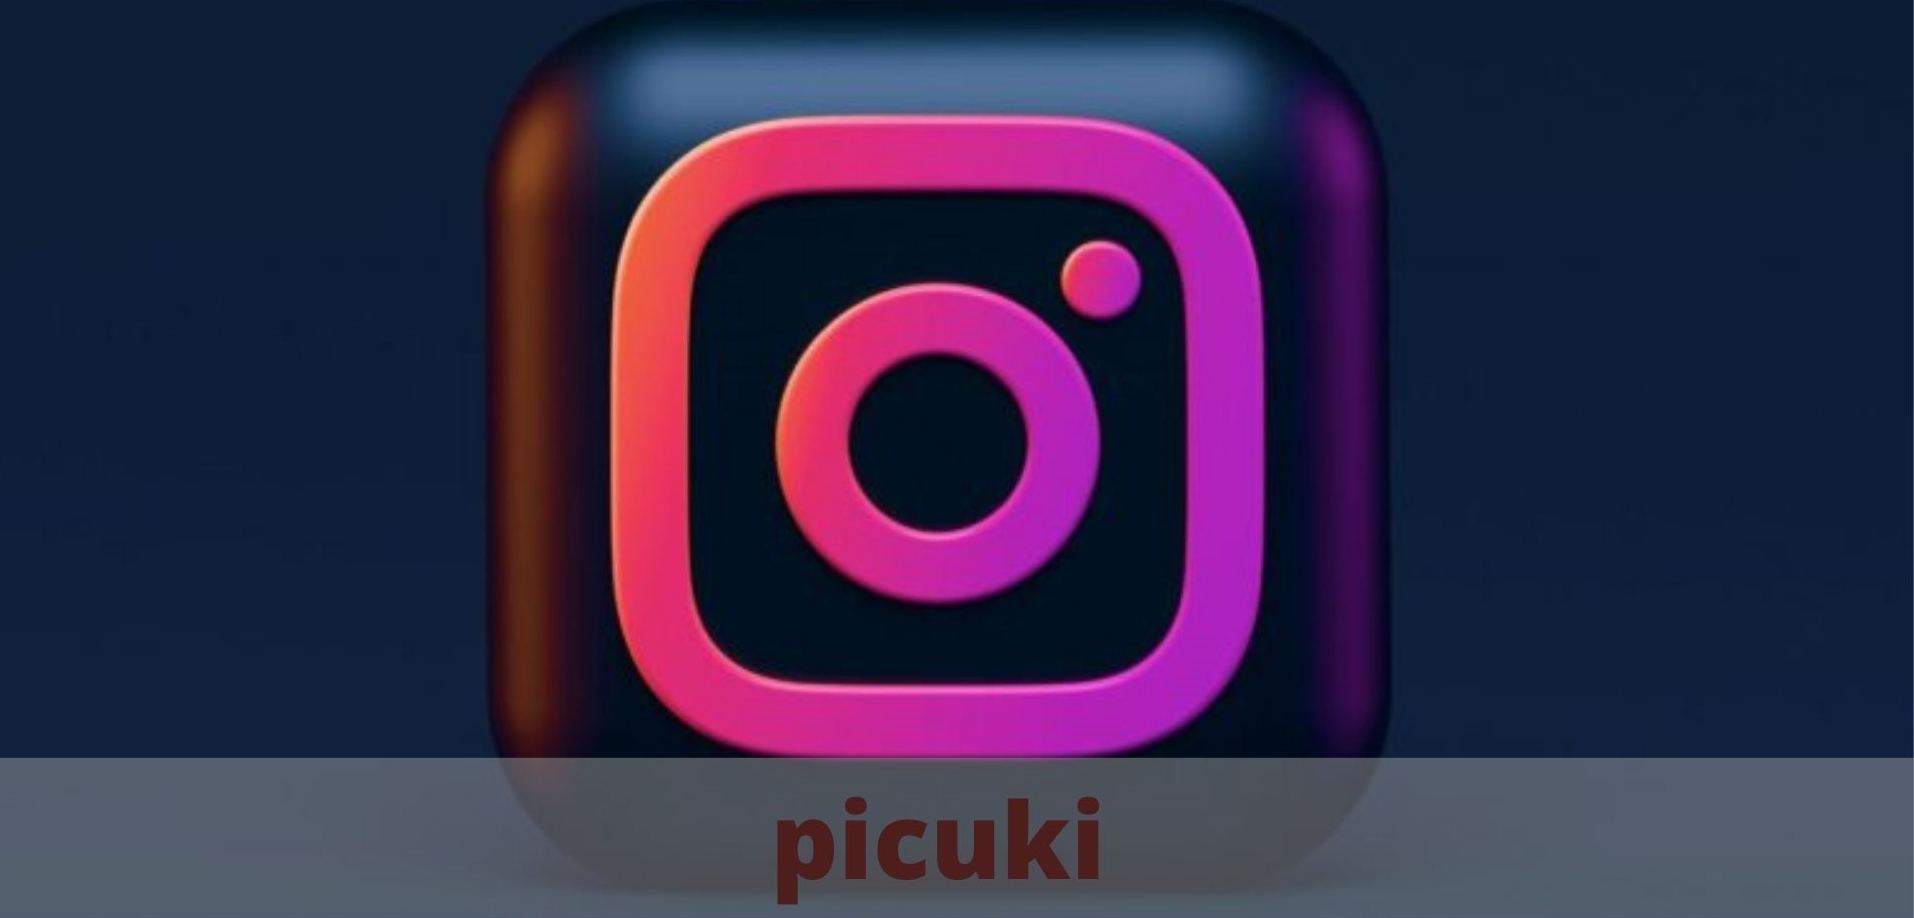 Picuki Instagram: Everything You Need To Know About Picuki